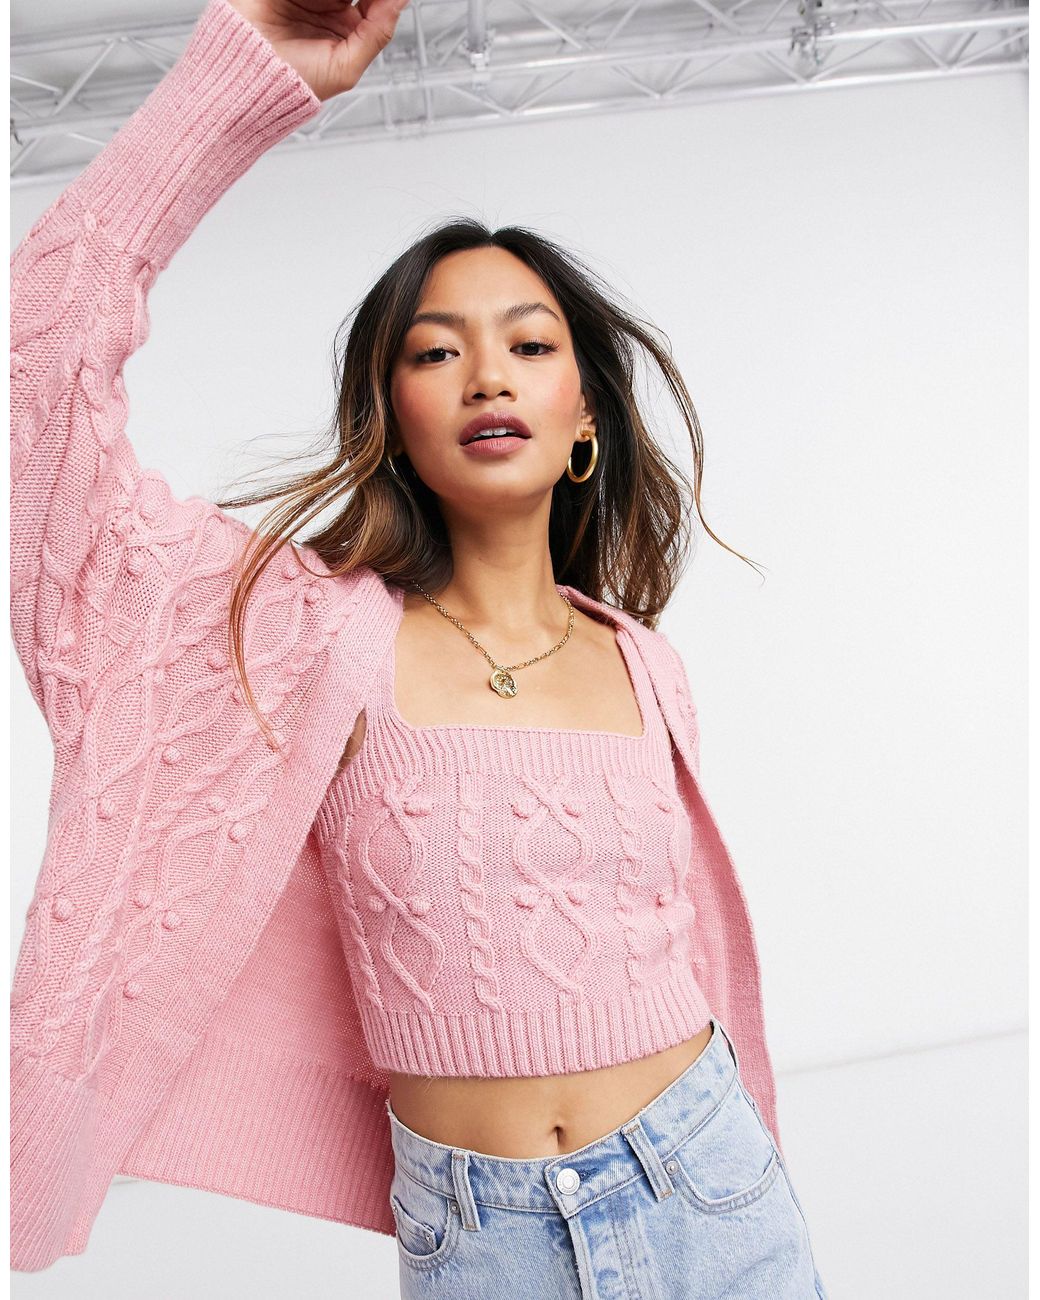 River Island Cable Knit Cardigan And Bralet Set in Pink | Lyst